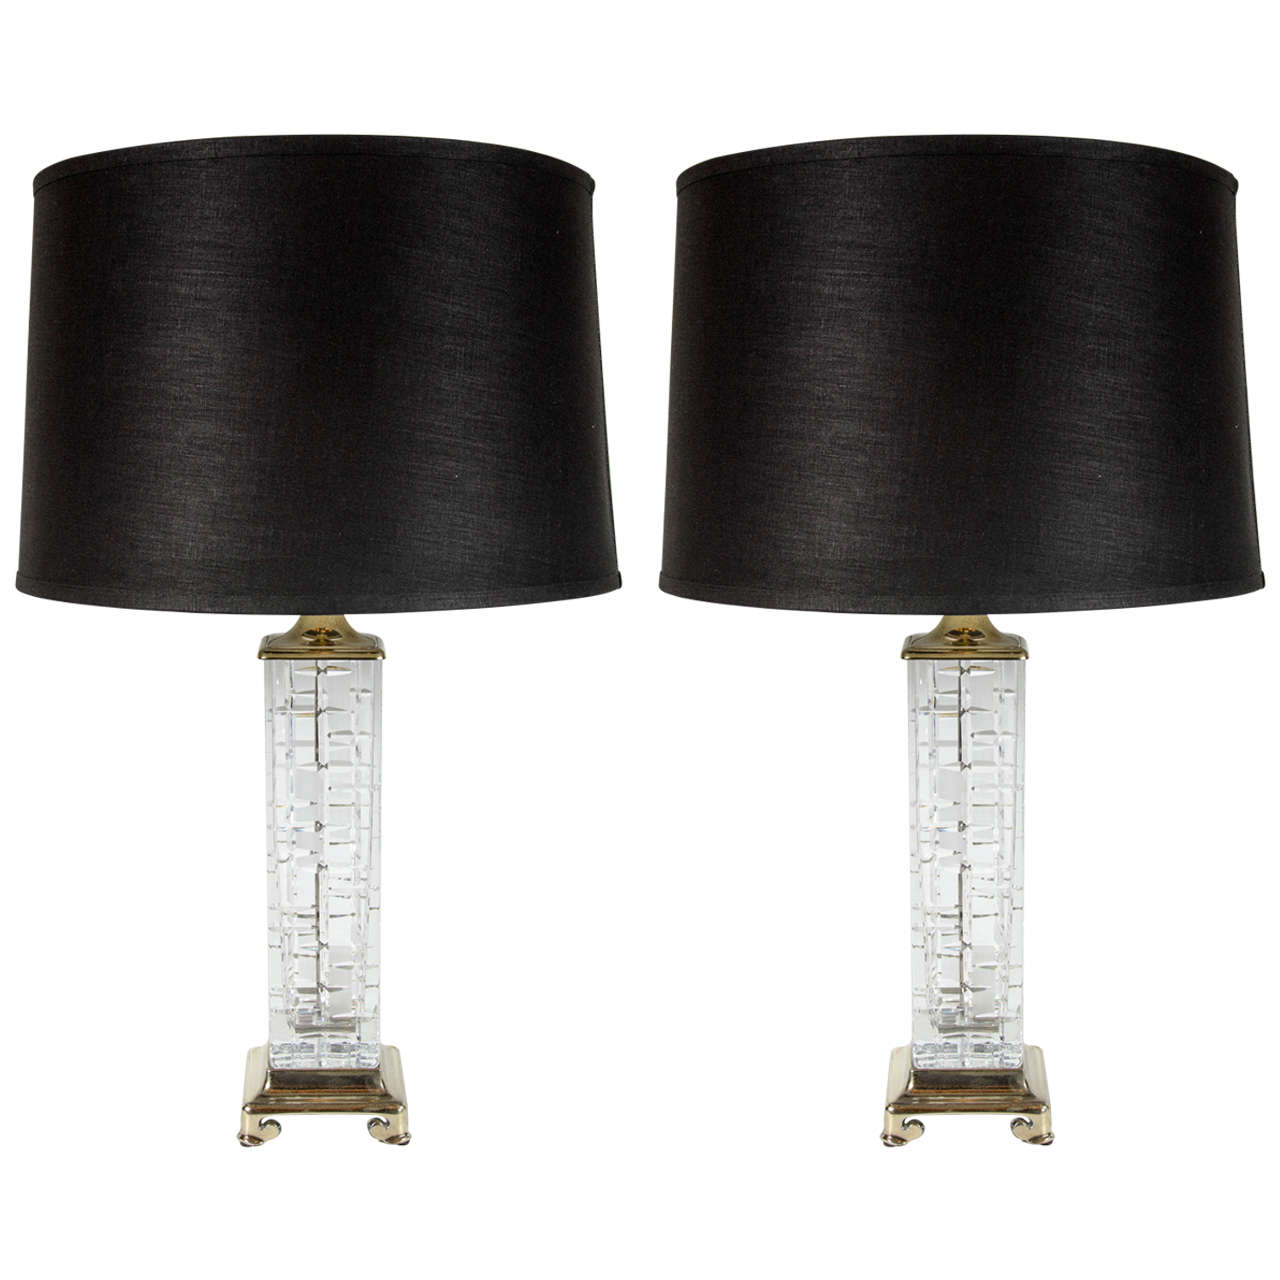 Brilliant Pair of Mid-Century Modern Etched Crystal Lamps by Geyer Dresden  at 1stDibs | dresden crystal lamp, dresden lamps